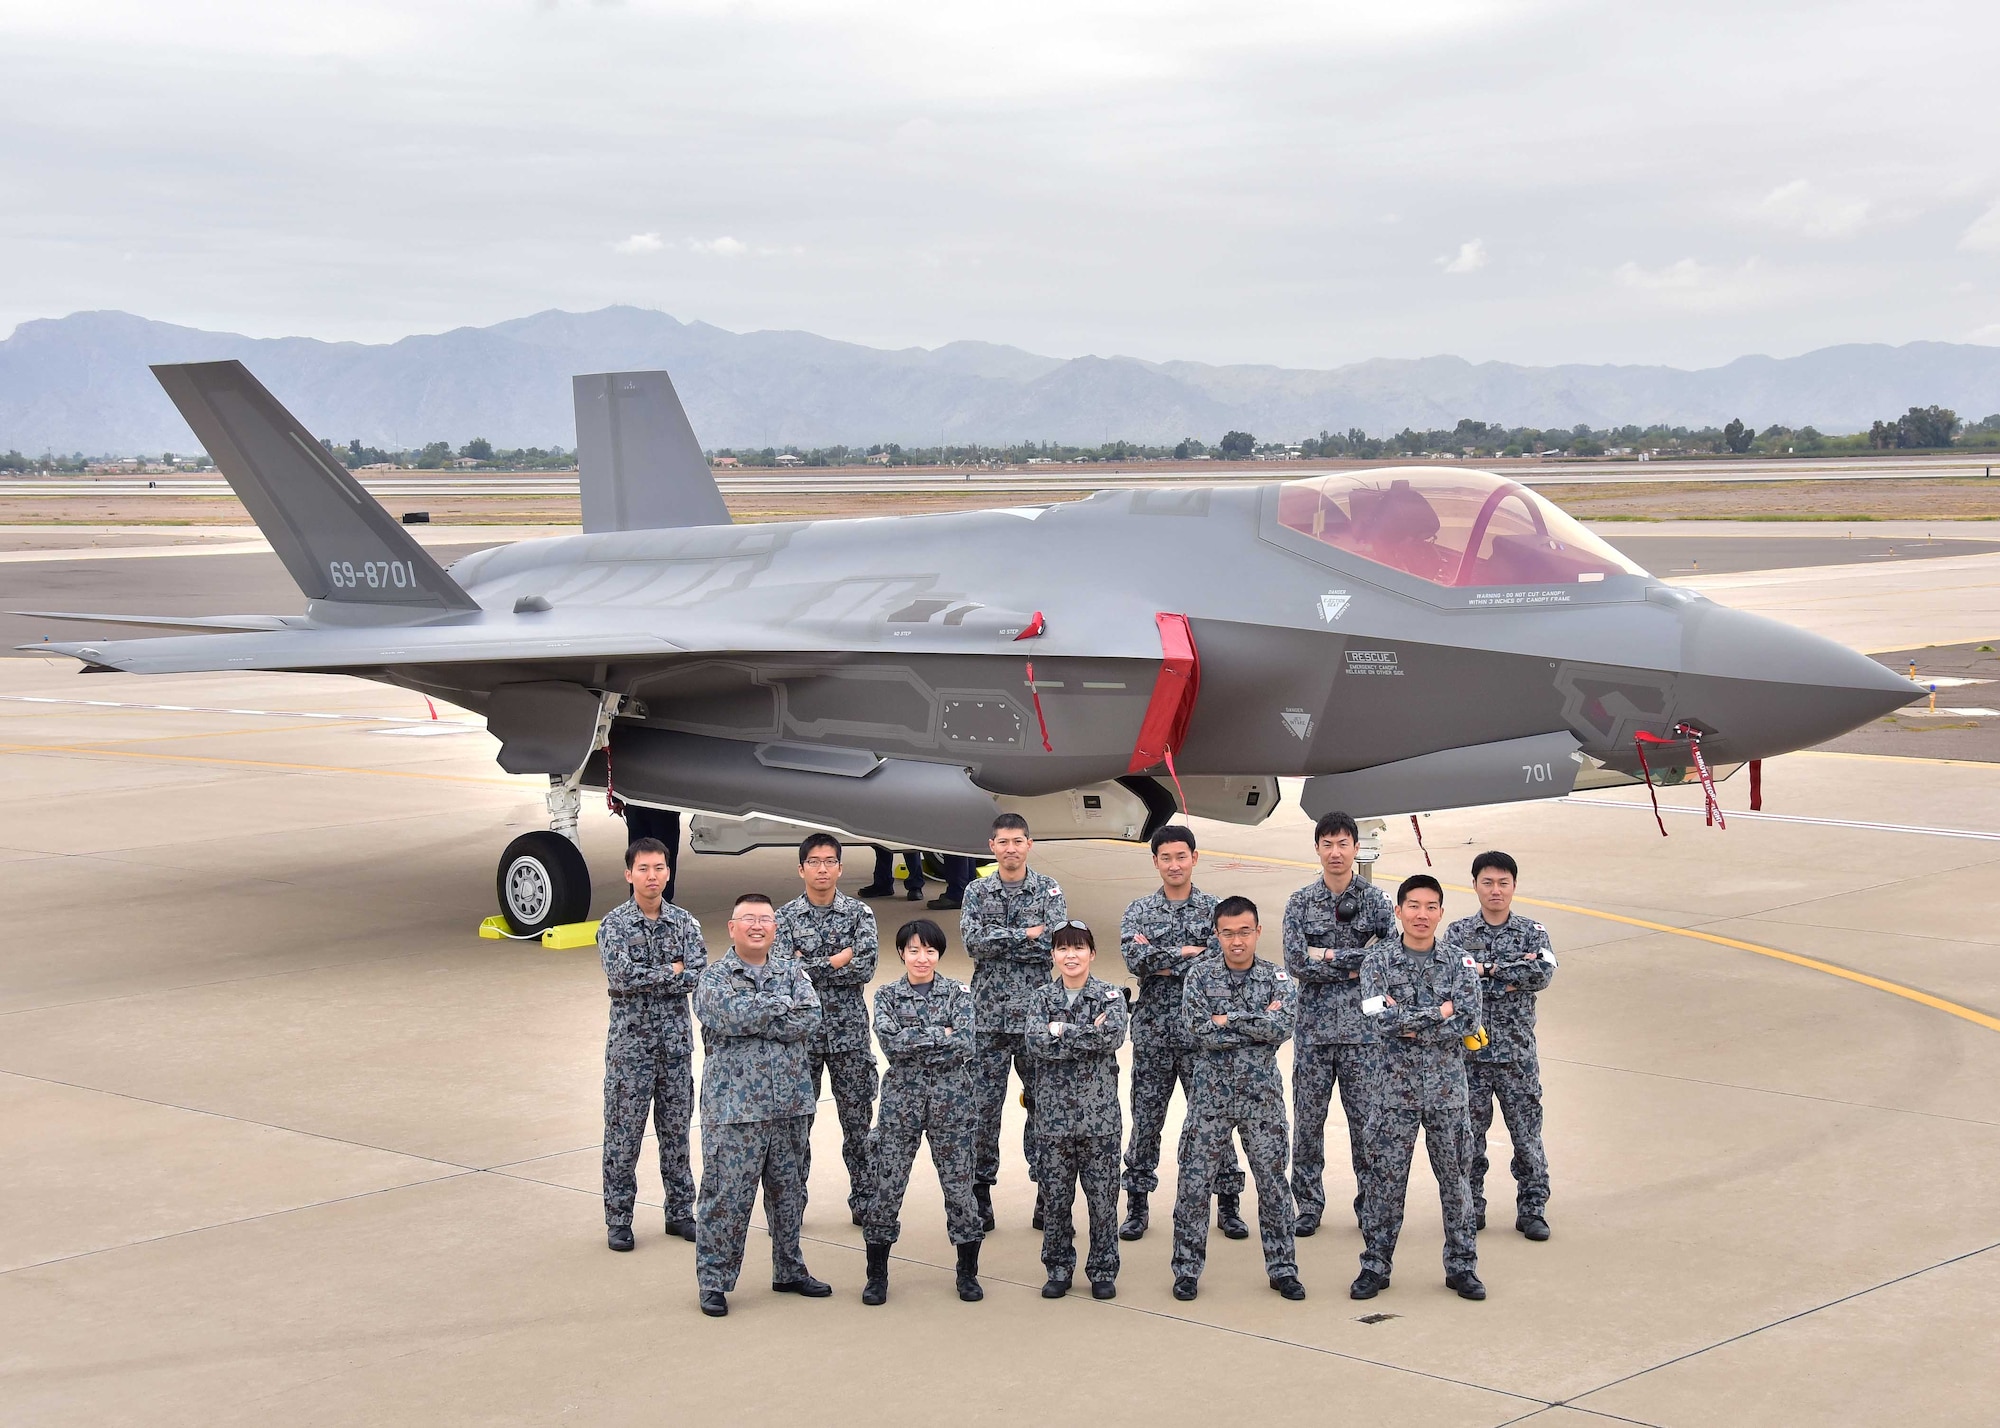 The Japanese Air Self-Defense Force maintainers pose for a photo Nov. 28 during the arrival of the first Japanese F-35A at Luke Air Force Base Ariz. (U.S. Air Force photo by Tech. Sgt. Louis Vega Jr.)